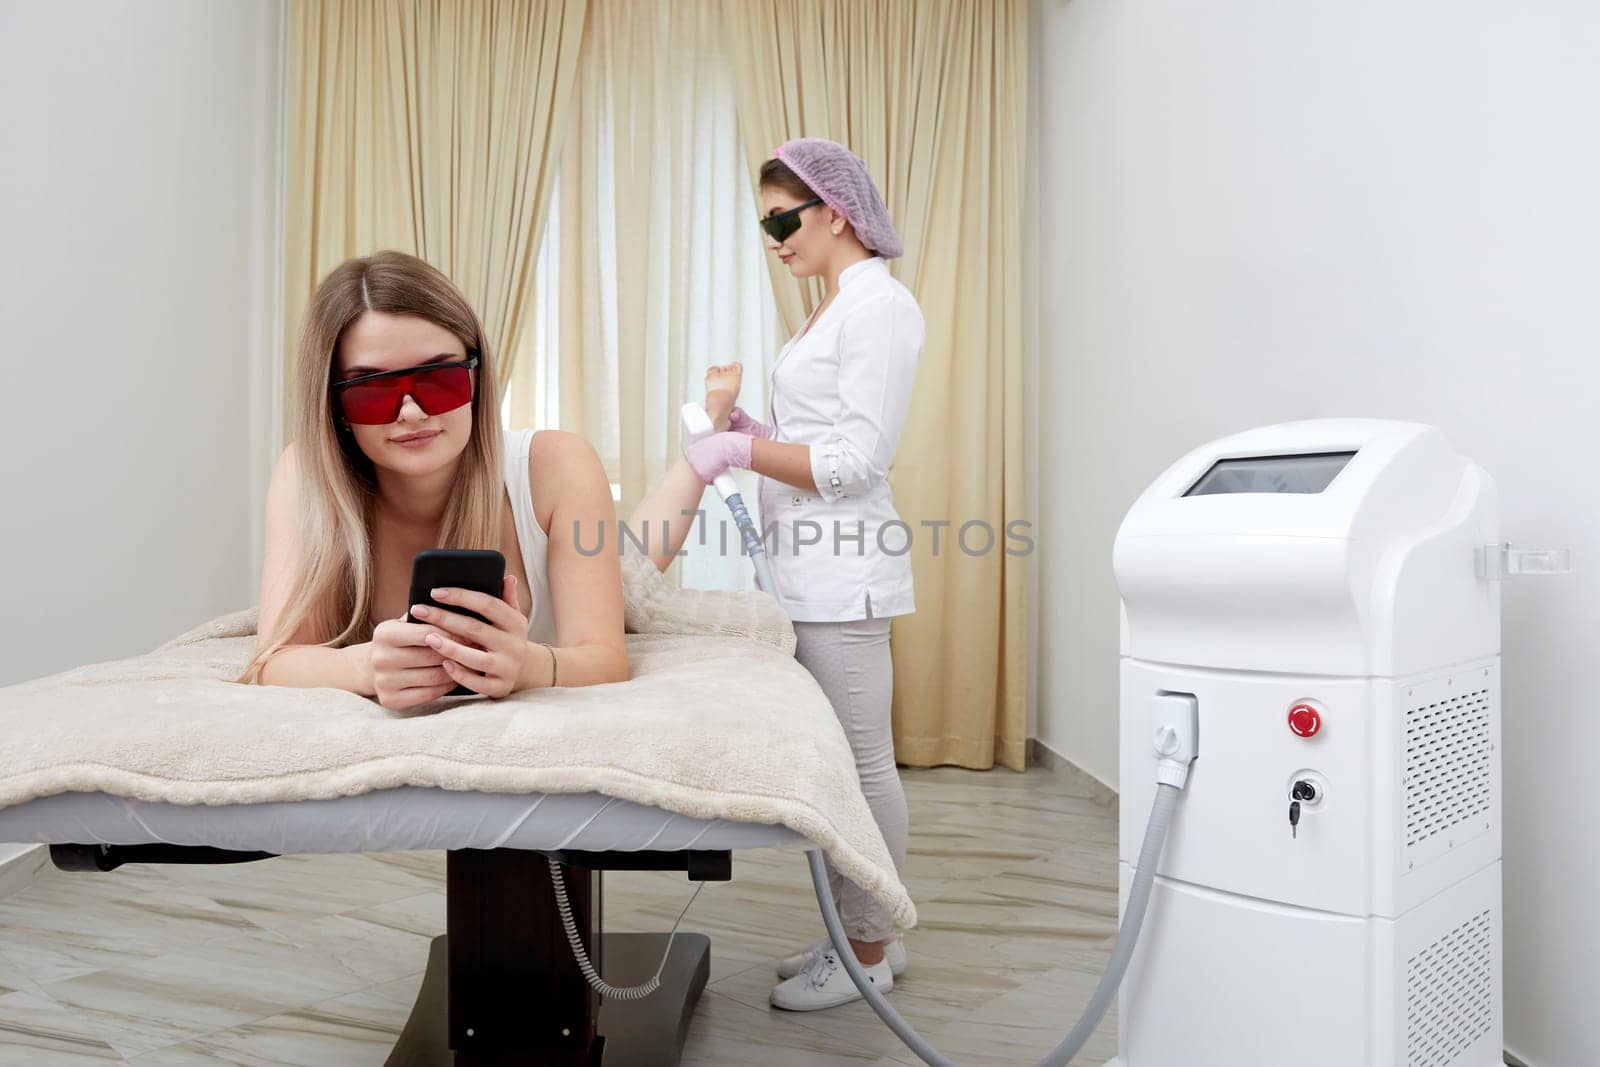 At beauty salon, woman relaxes during laser hair removal session on her legs by Mariakray